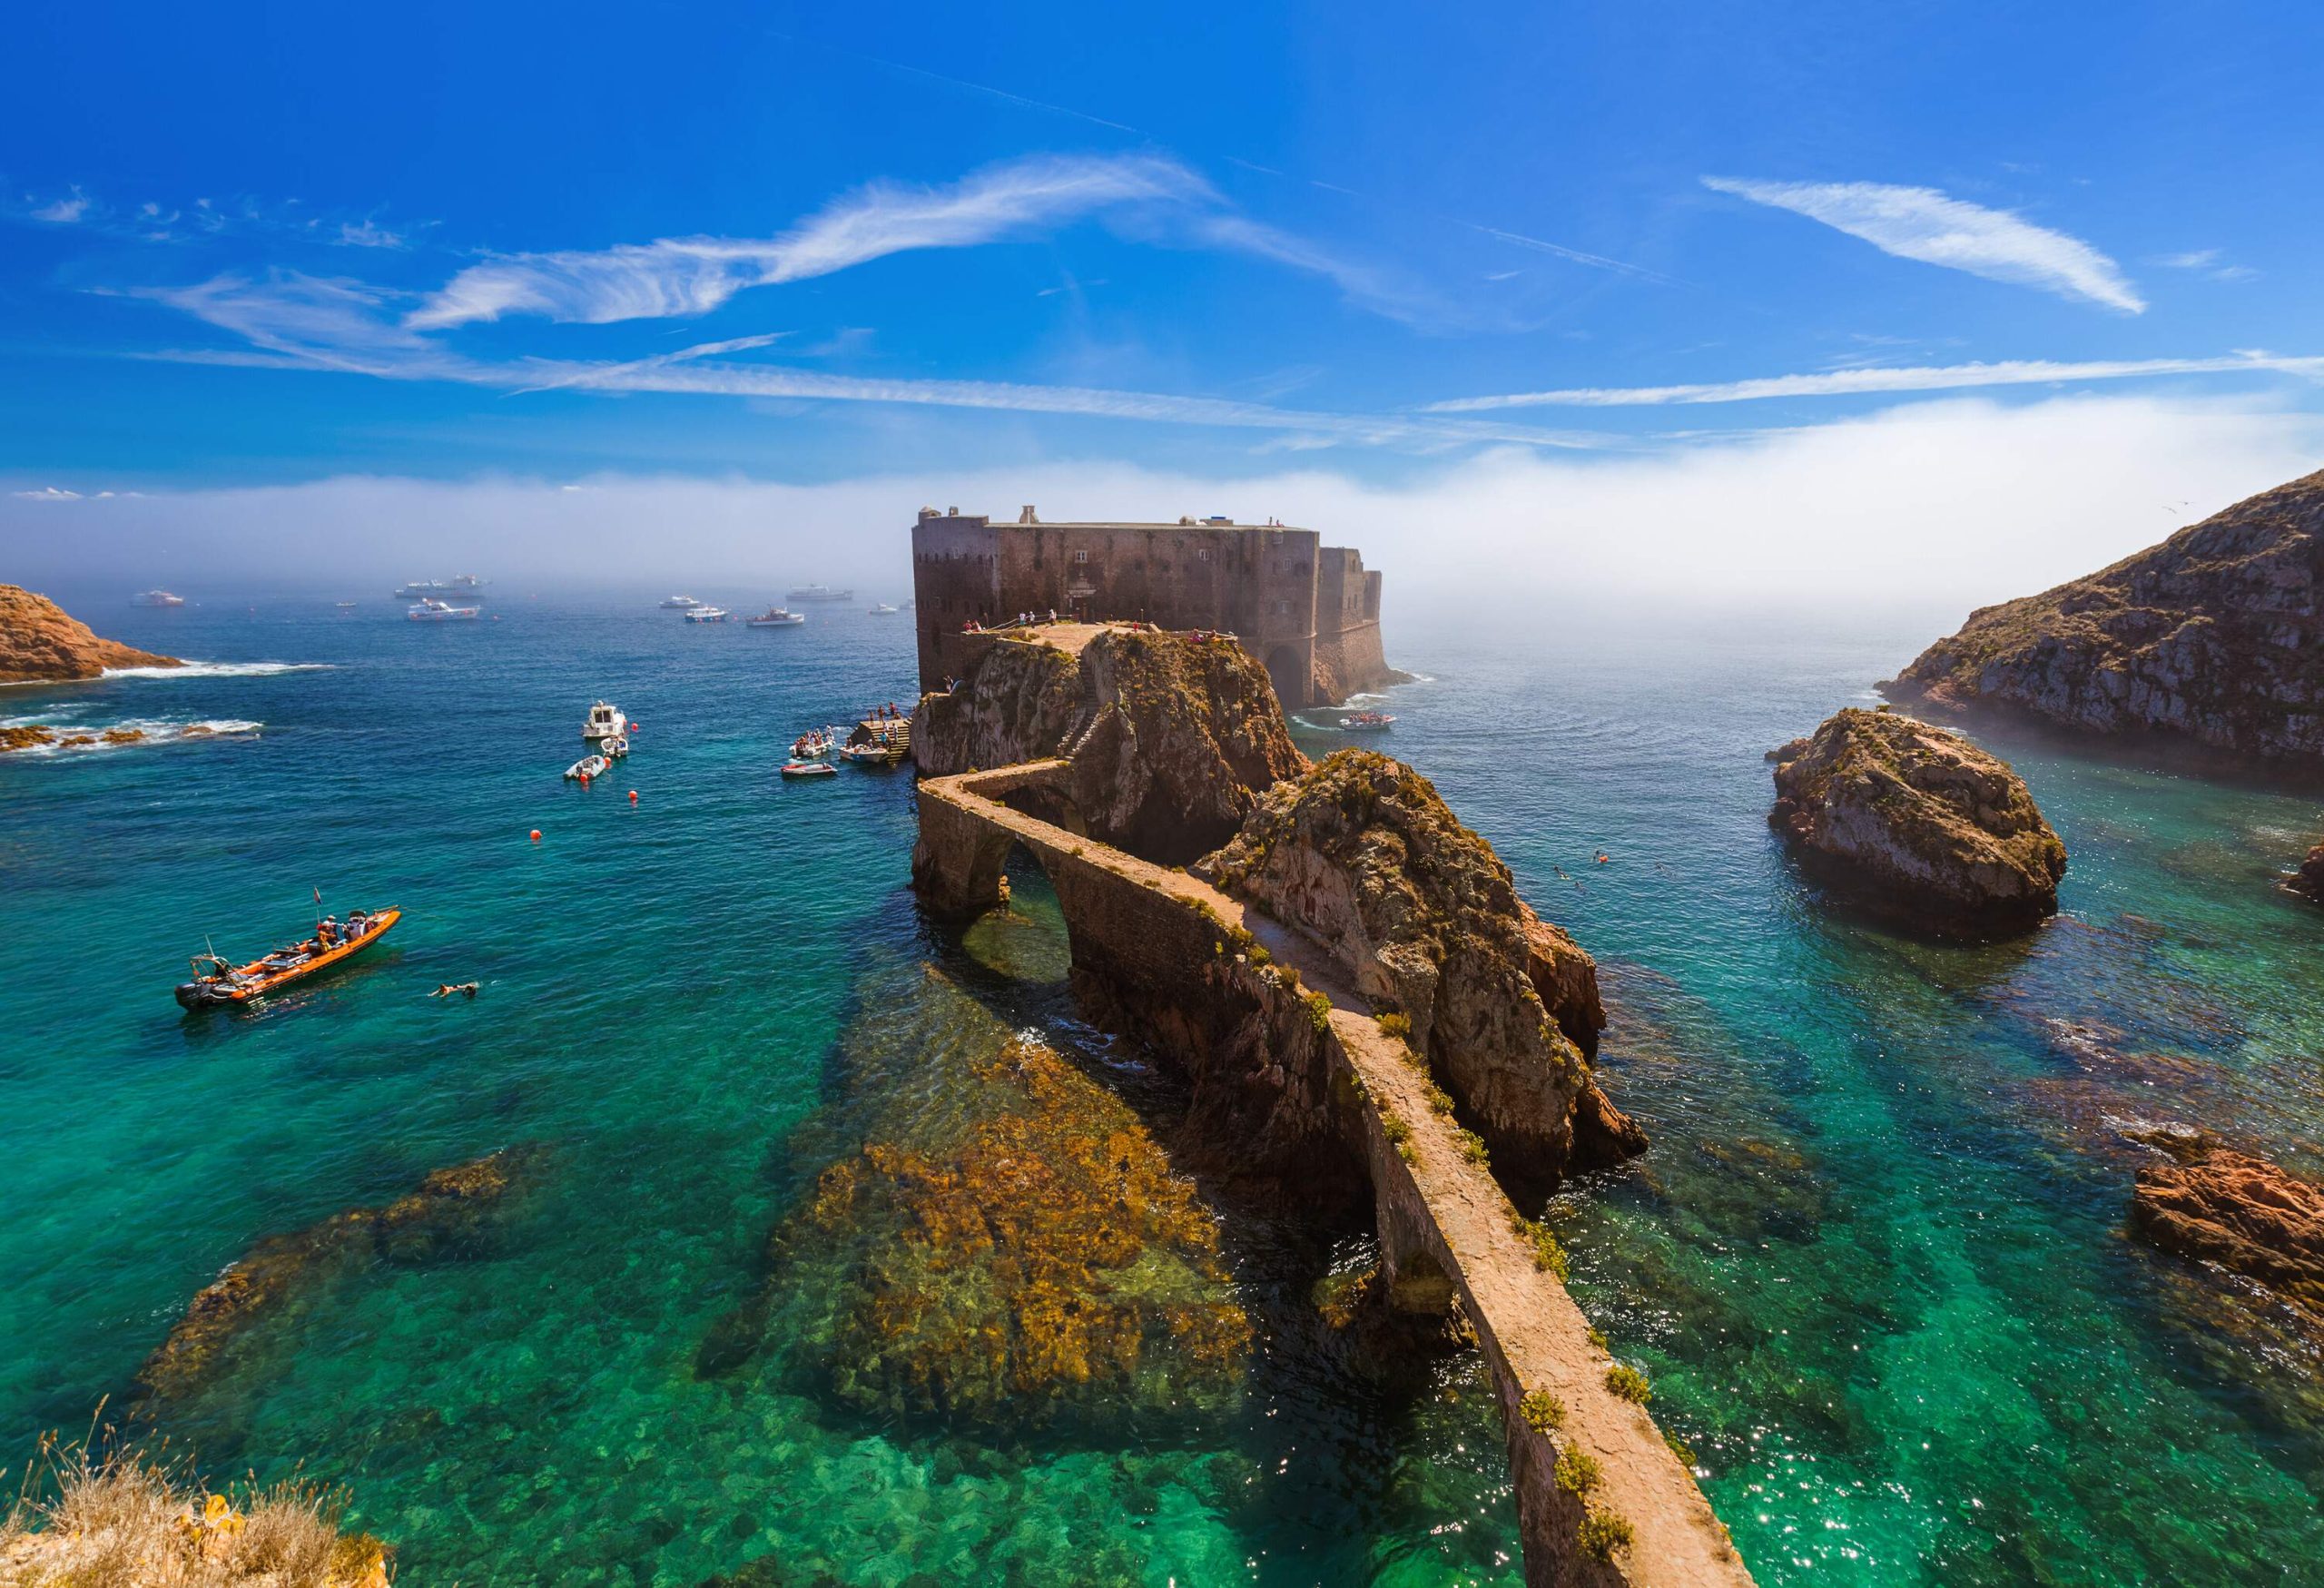 The Fort of the Berlengas stretches to the sea and accessed through a narrow-path bridge across the pristine waters with sailing boats.